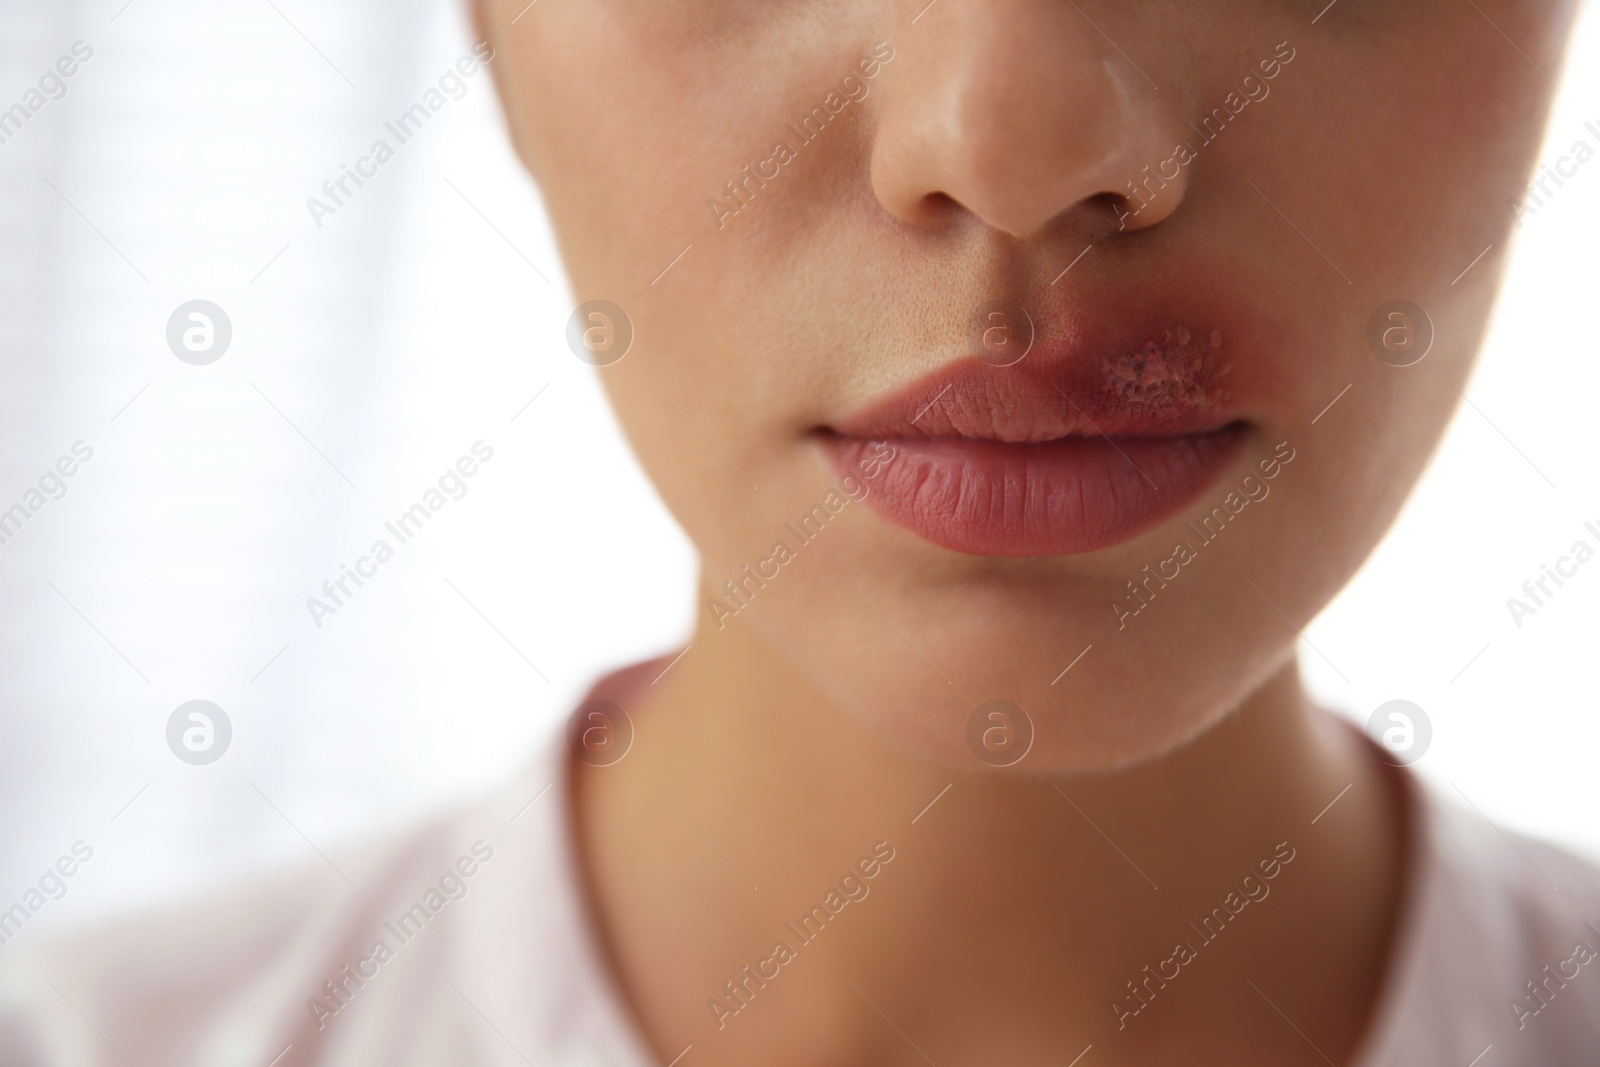 Photo of Woman with herpes on lip against light background, closeup